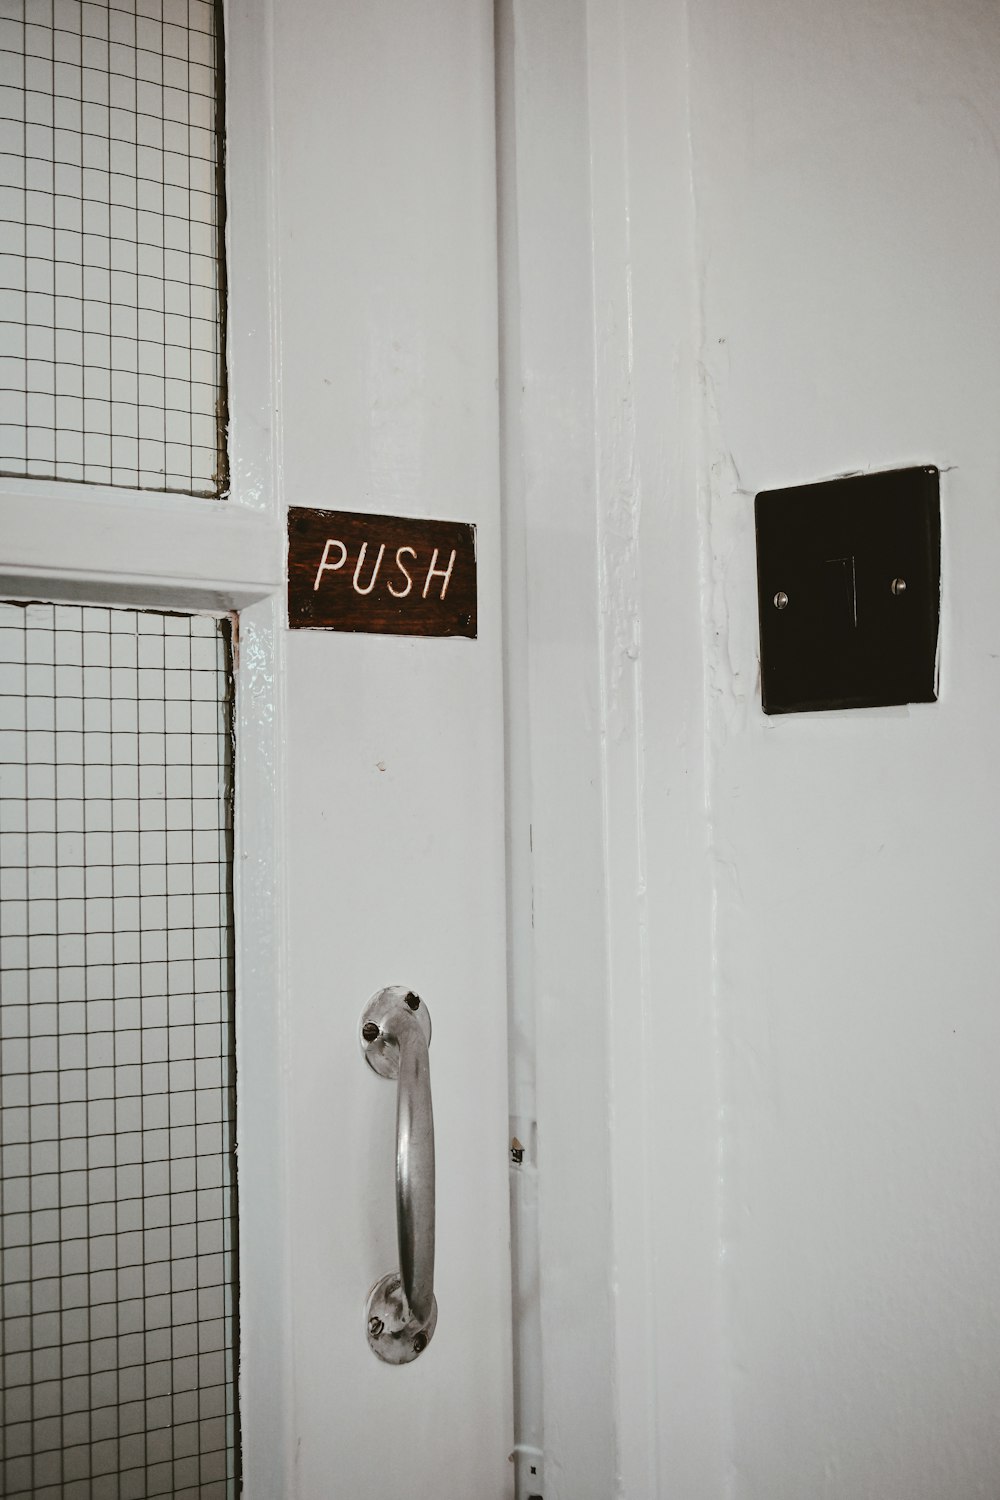 a door handle with a push sign on it